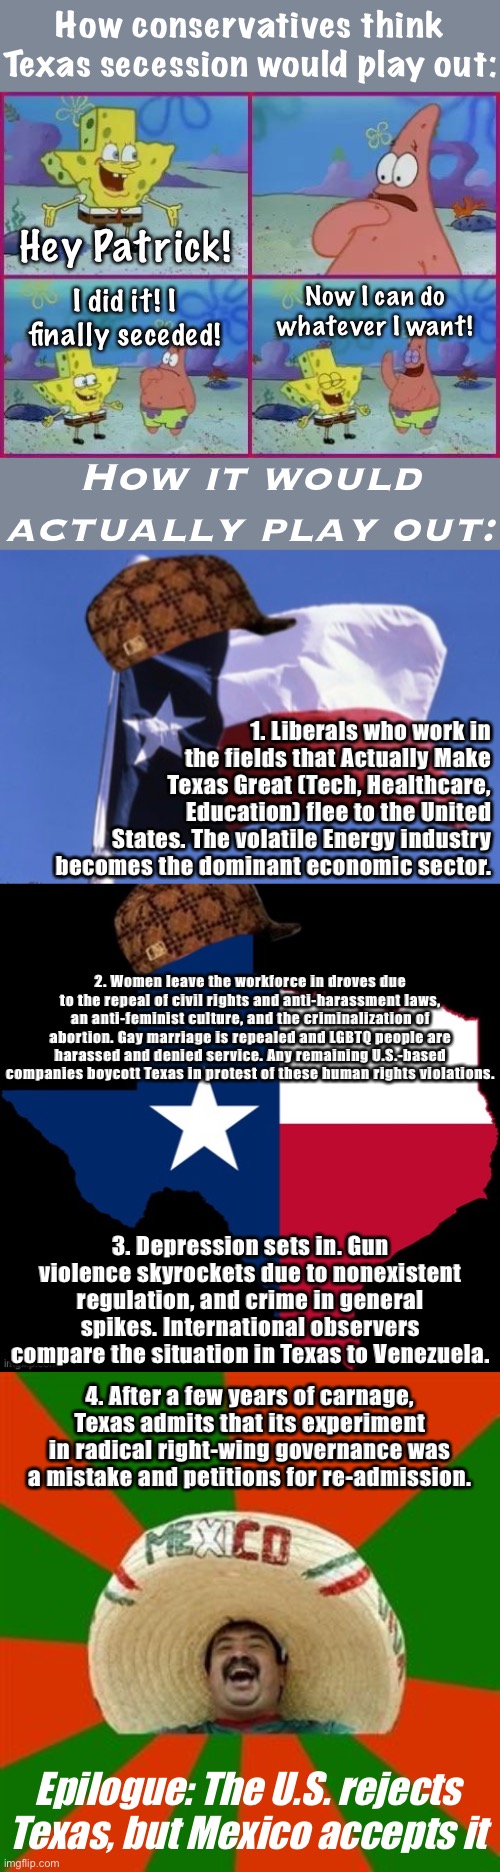 Would be sad for the liberal residents of Texas, but instructive for the rest of us (and would turn America blue, lol) | How conservatives think Texas secession would play out:; Hey Patrick! Now I can do whatever I want! I did it! I finally seceded! How it would actually play out:; 1. Liberals who work in the fields that Actually Make Texas Great (Tech, Healthcare, Education) flee to the United States. The volatile Energy industry becomes the dominant economic sector. 2. Women leave the workforce in droves due to the repeal of civil rights and anti-harassment laws, an anti-feminist culture, and the criminalization of abortion. Gay marriage is repealed and LGBTQ people are harassed and denied service. Any remaining U.S.-based companies boycott Texas in protest of these human rights violations. 3. Depression sets in. Gun violence skyrockets due to nonexistent regulation, and crime in general spikes. International observers compare the situation in Texas to Venezuela. 4. After a few years of carnage, Texas admits that its experiment in radical right-wing governance was a mistake and petitions for re-admission. Epilogue: The U.S. rejects Texas, but Mexico accepts it | image tagged in texas spongebob,scumbag texas,succesful mexican,texas,alternate reality,conservative logic | made w/ Imgflip meme maker